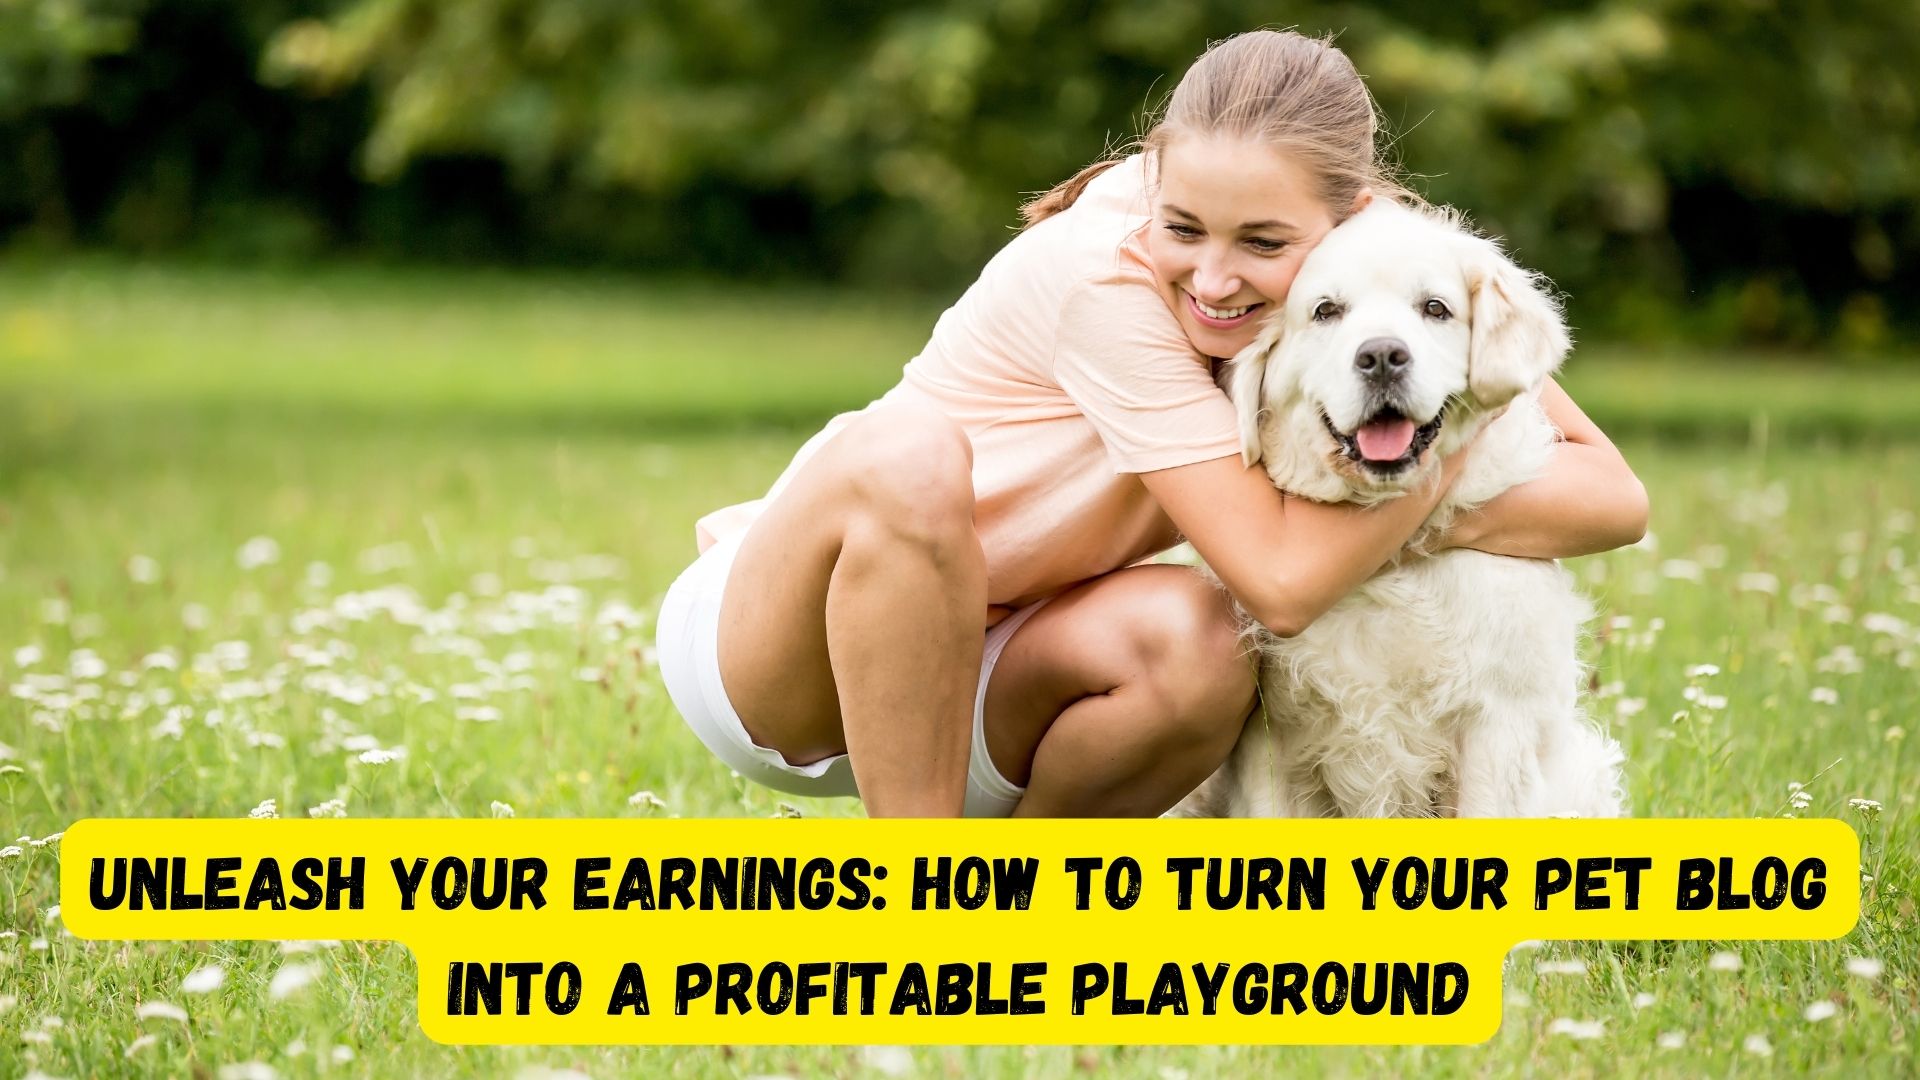 Unleash Your Earnings: How to Turn Your Pet Blog into a Profitable Playground